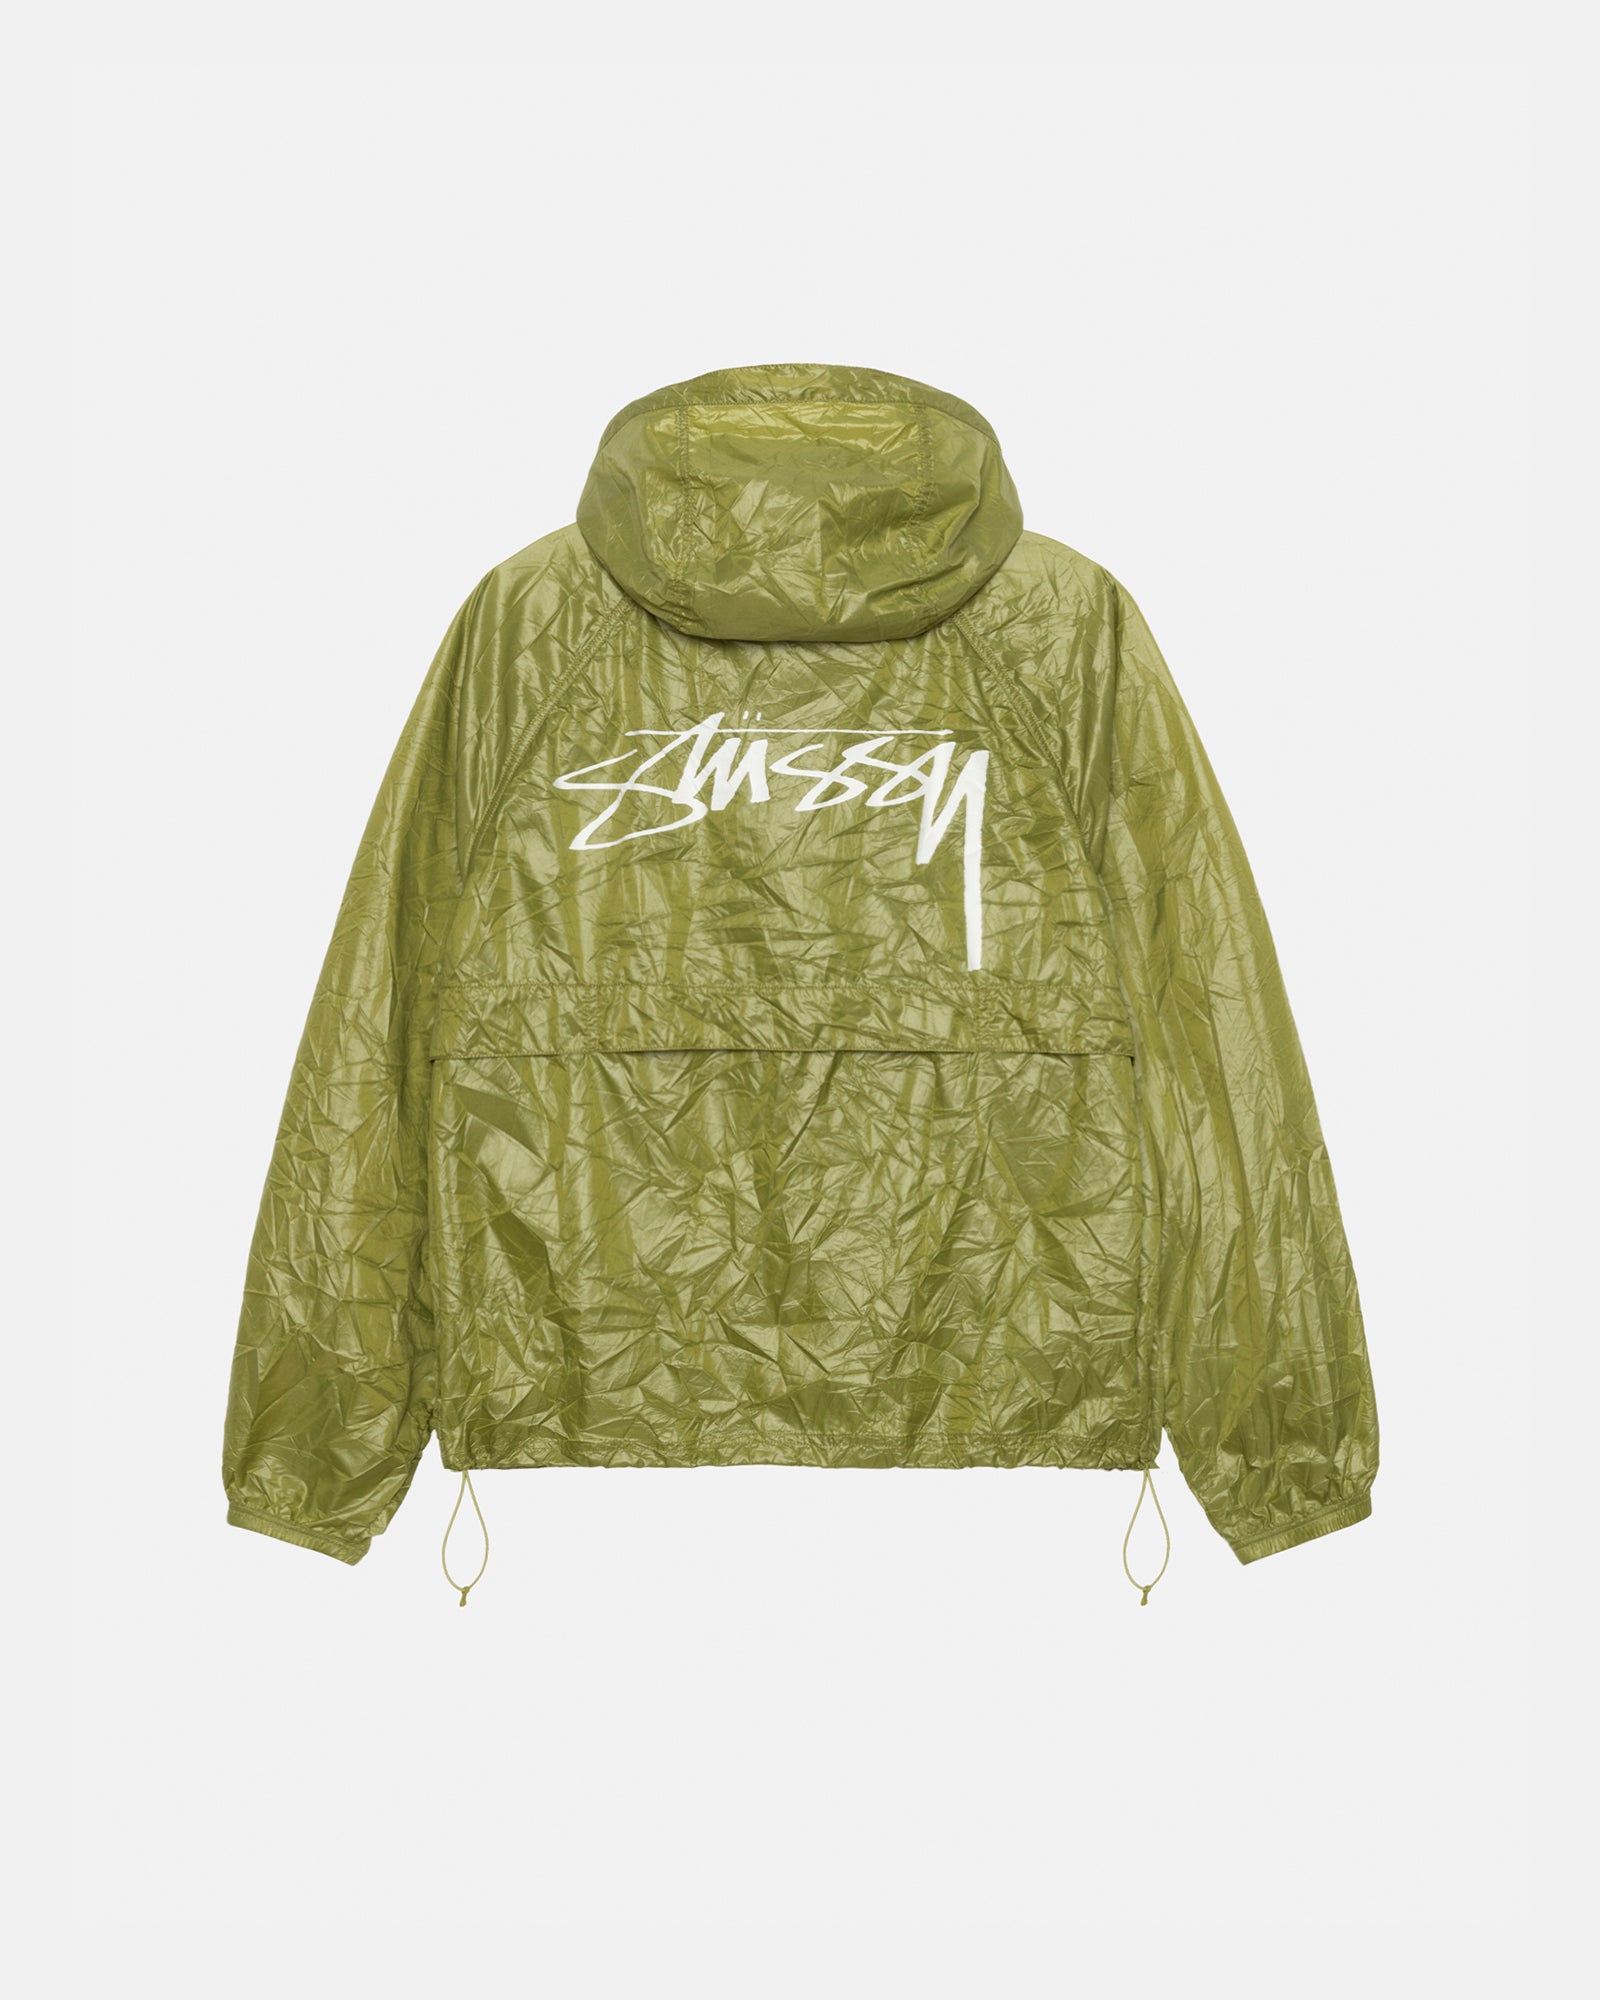 SHOP ALL** DO NOT DELETE / USED FOR SWATCHES – Stüssy